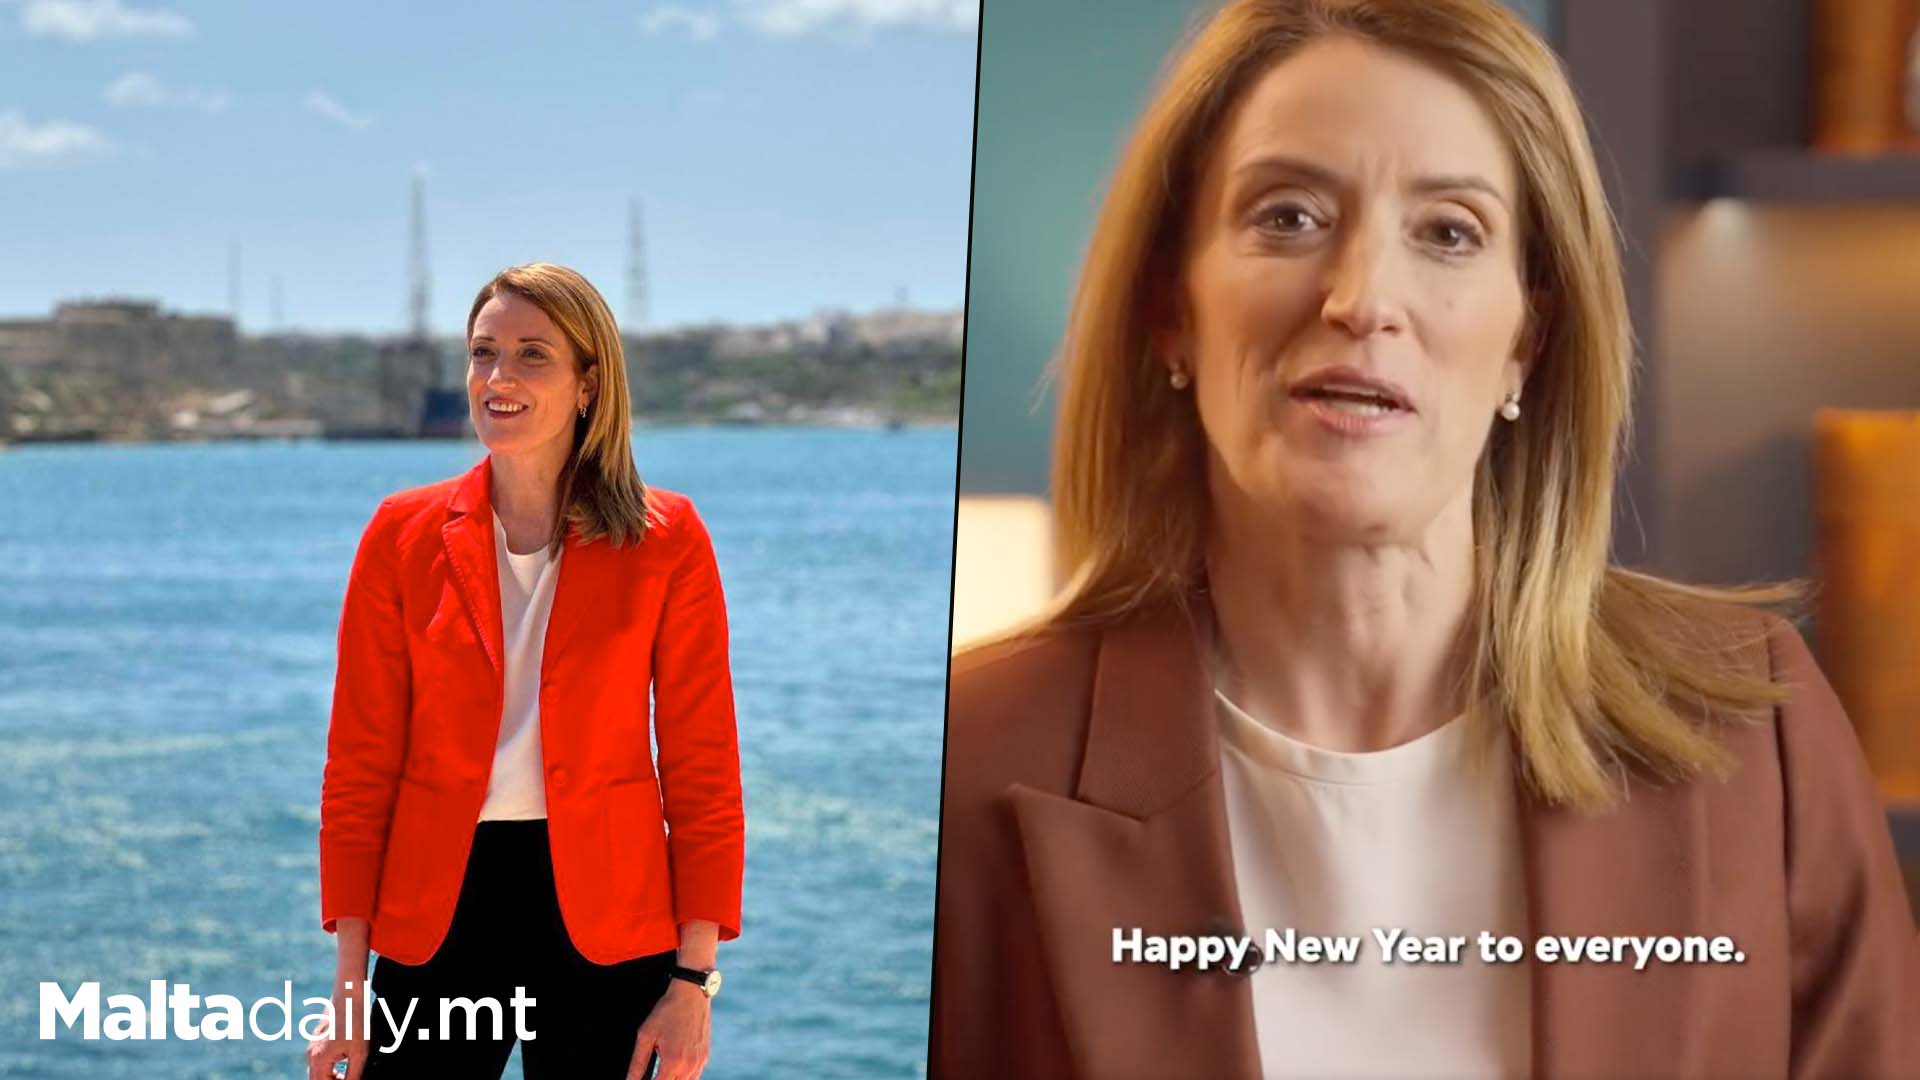 Roberta Metsola’s Message For The New Year